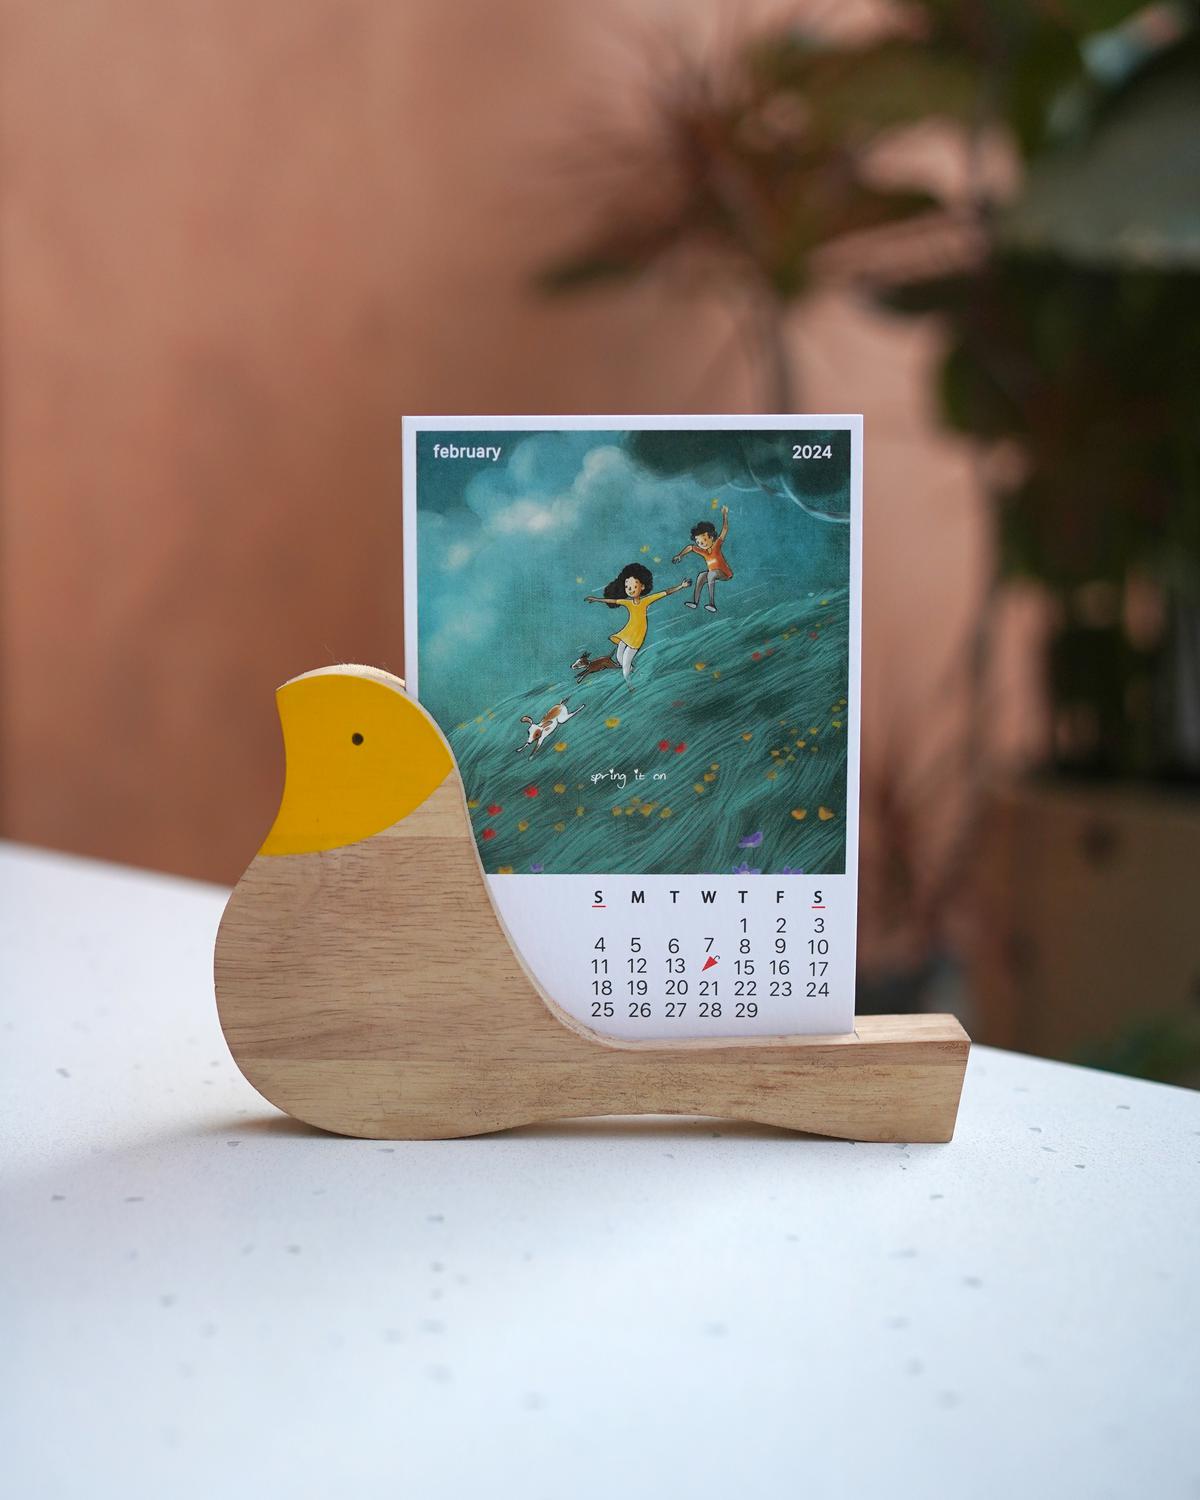 Vimal Chandran’s calendar with the wooden bird stand